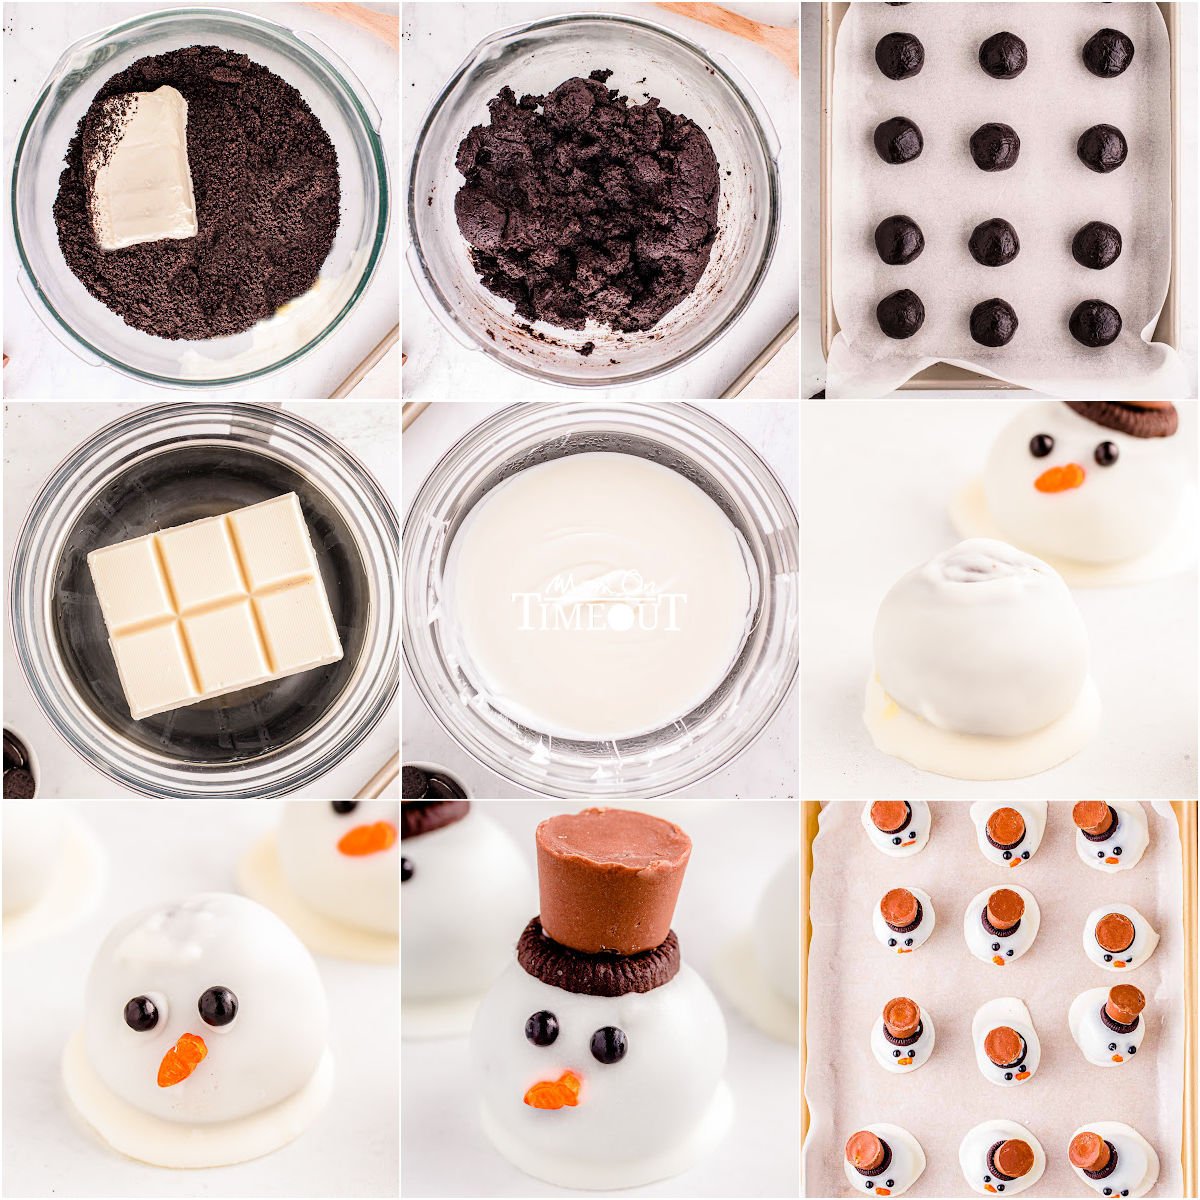 nine image collage showing how to make snowman oreo balls.